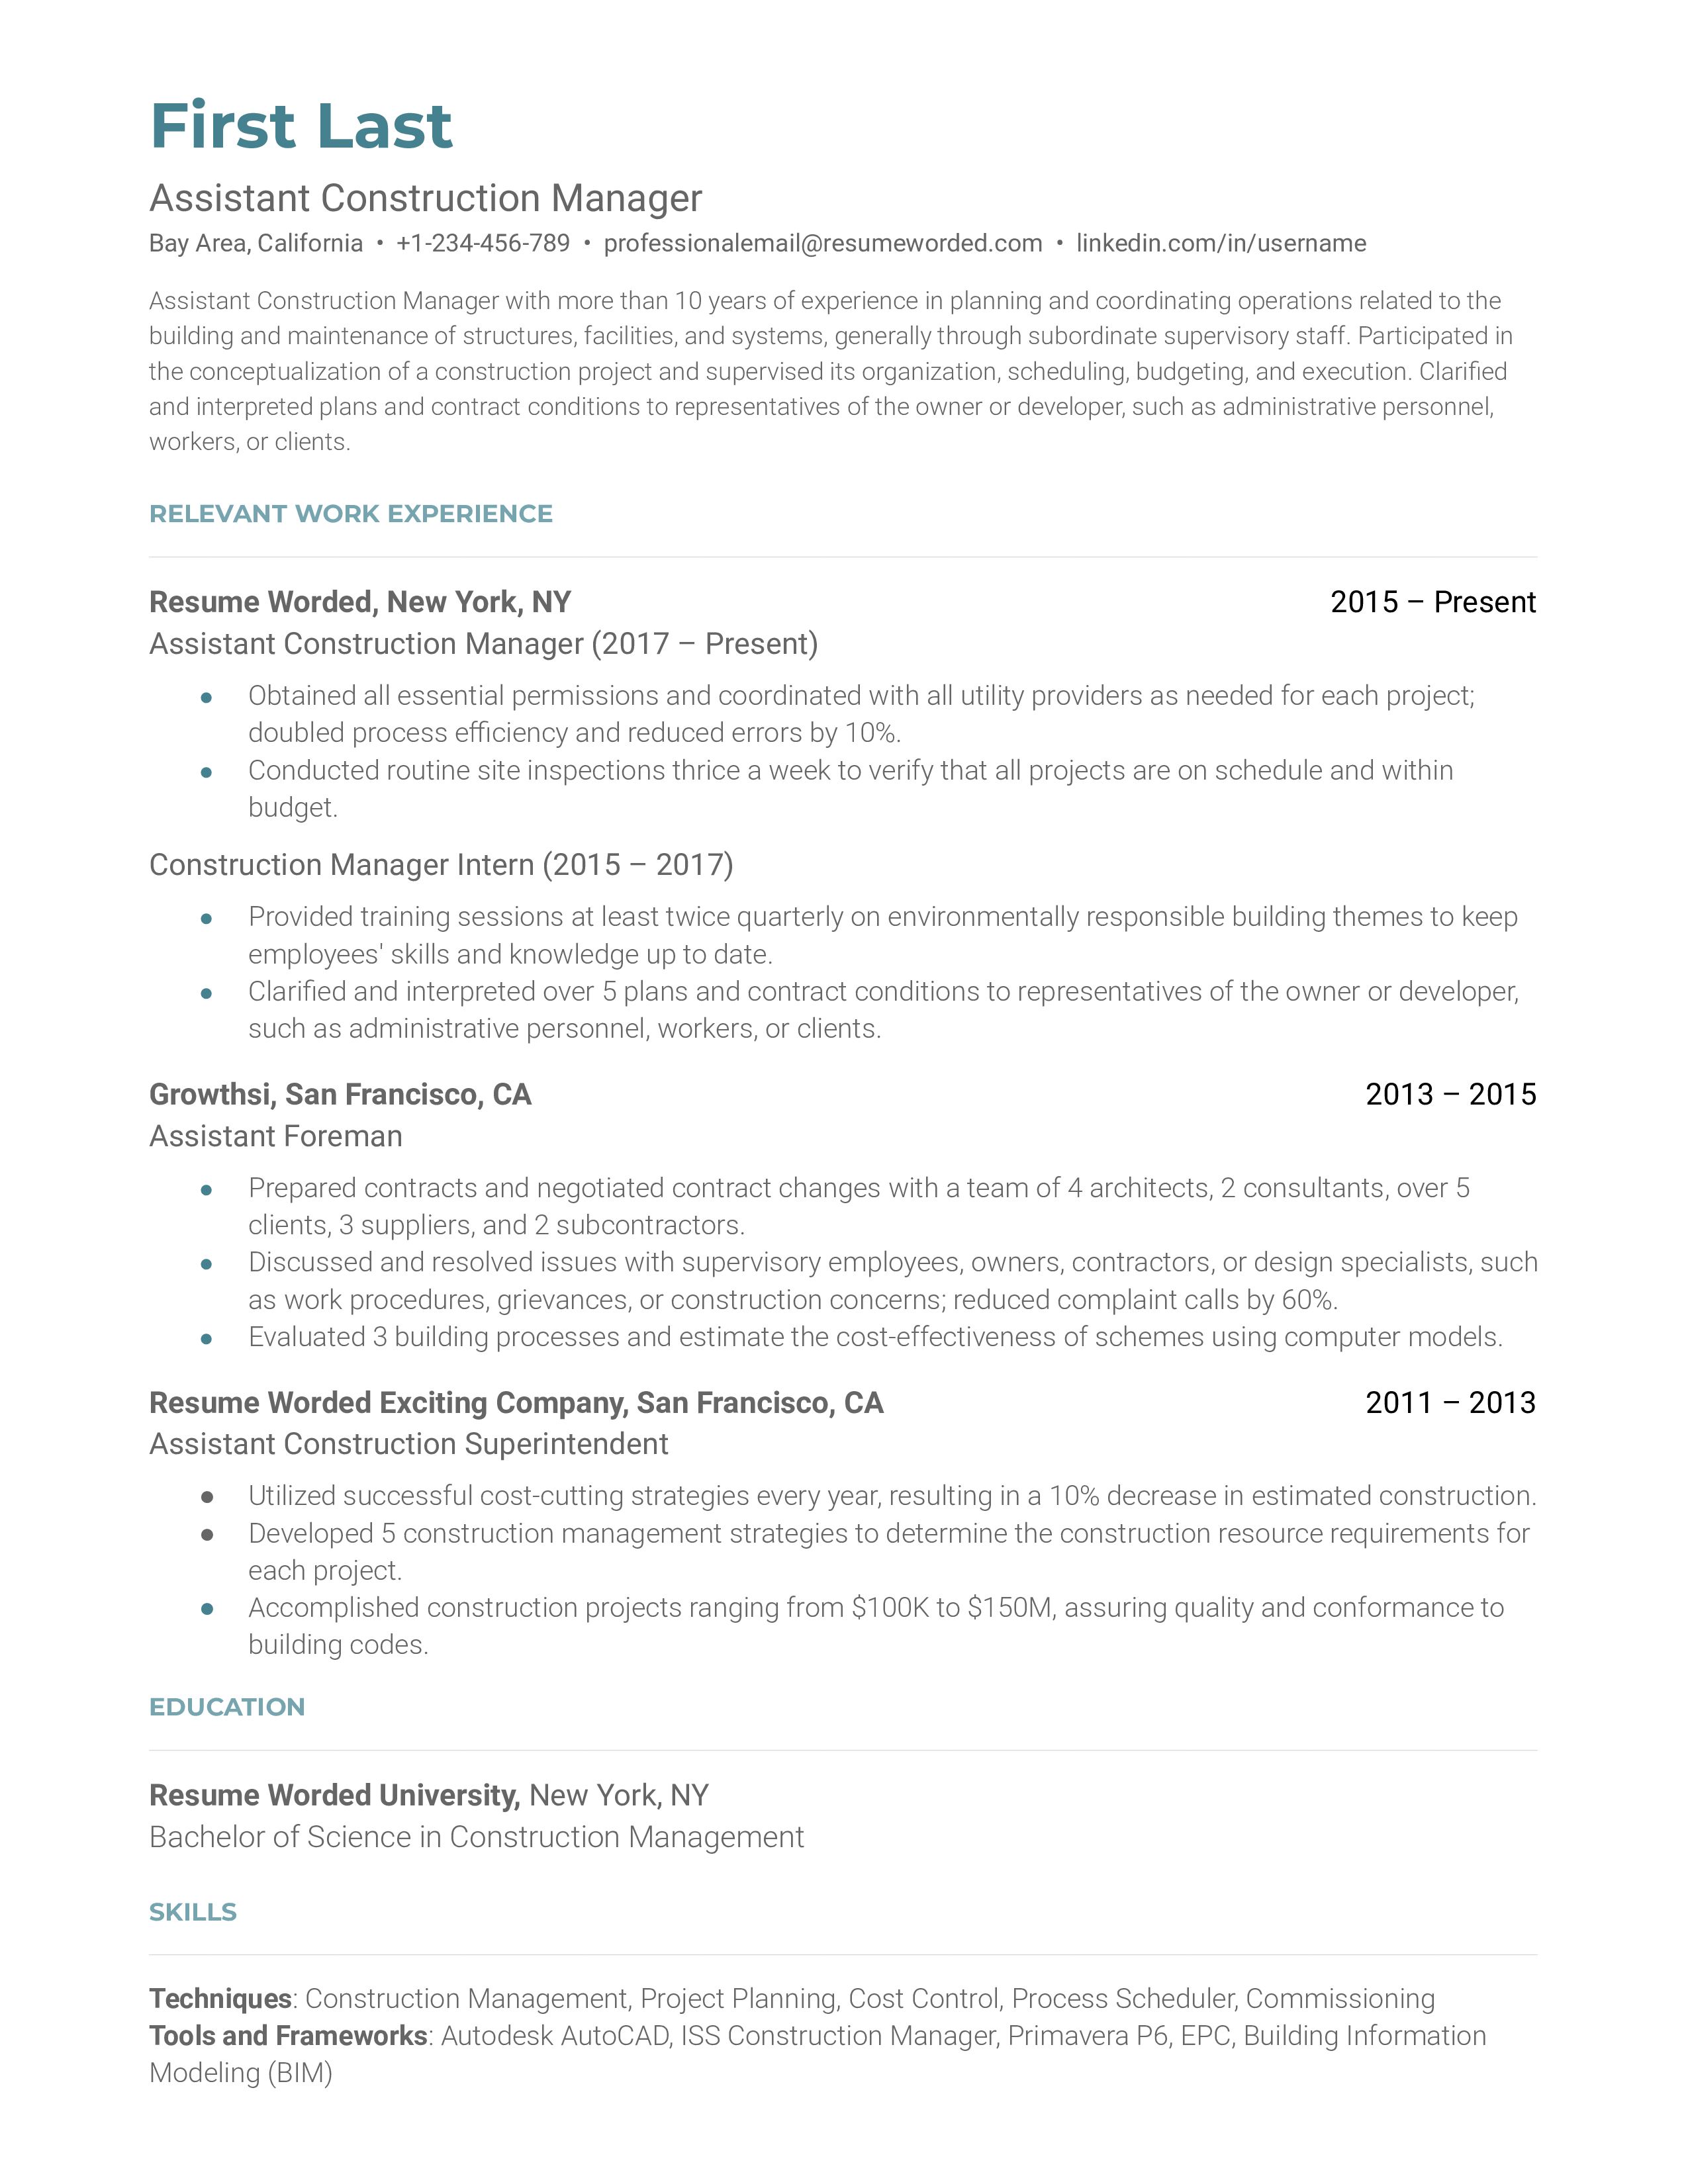 Assistant Construction Manager Resume Template + Example